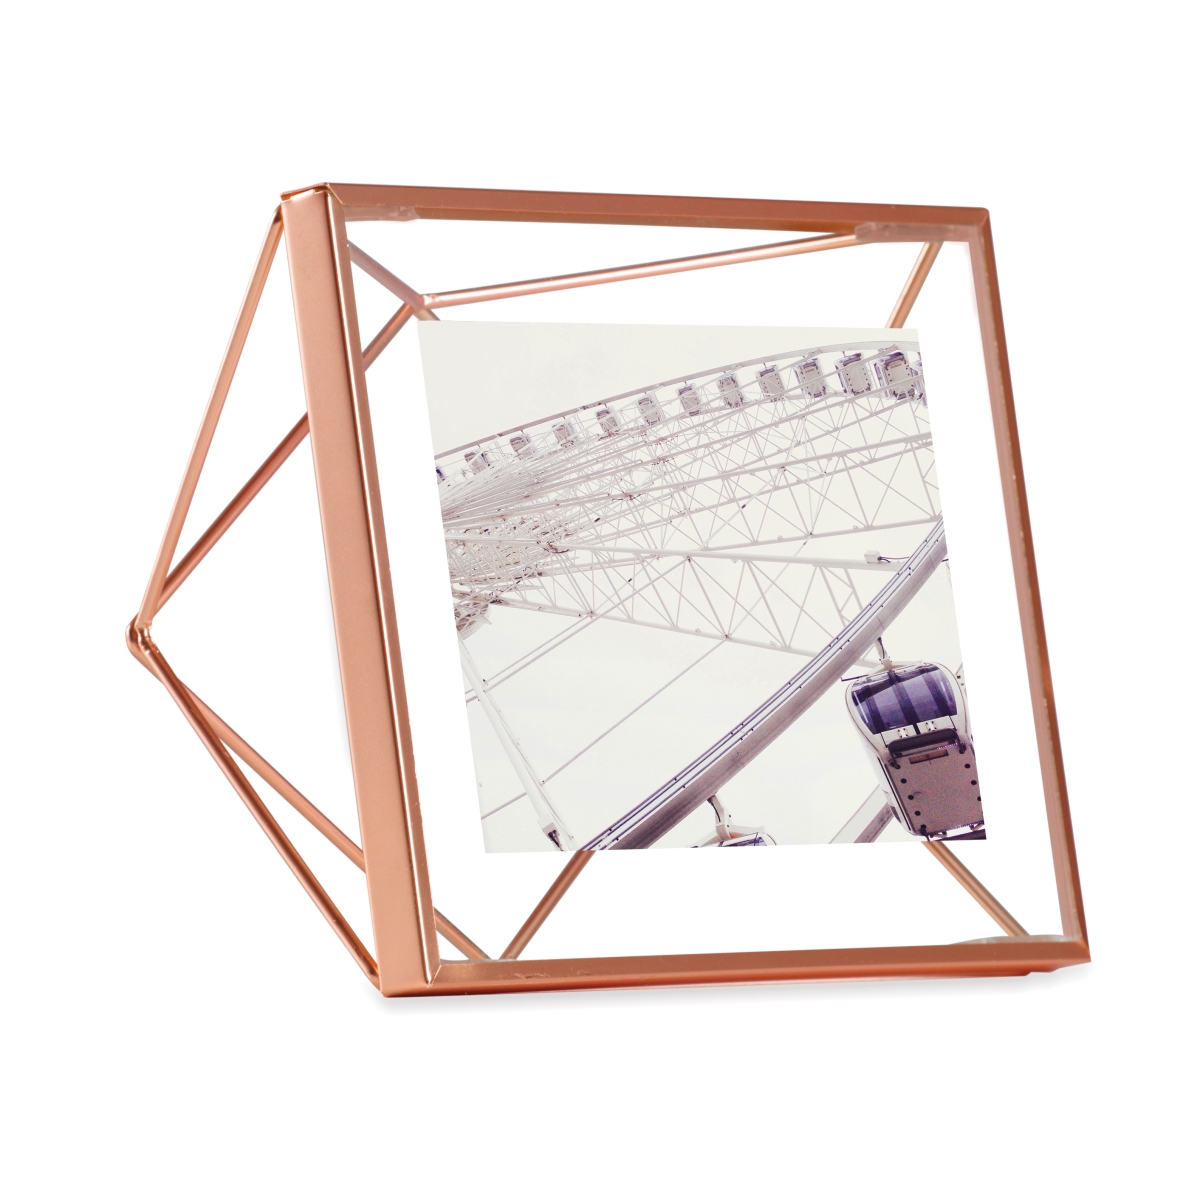 313017-880 4 X 4 In. Prisma Picture Frame Floating Wall Or Desk Photo Display, Metal - Copper